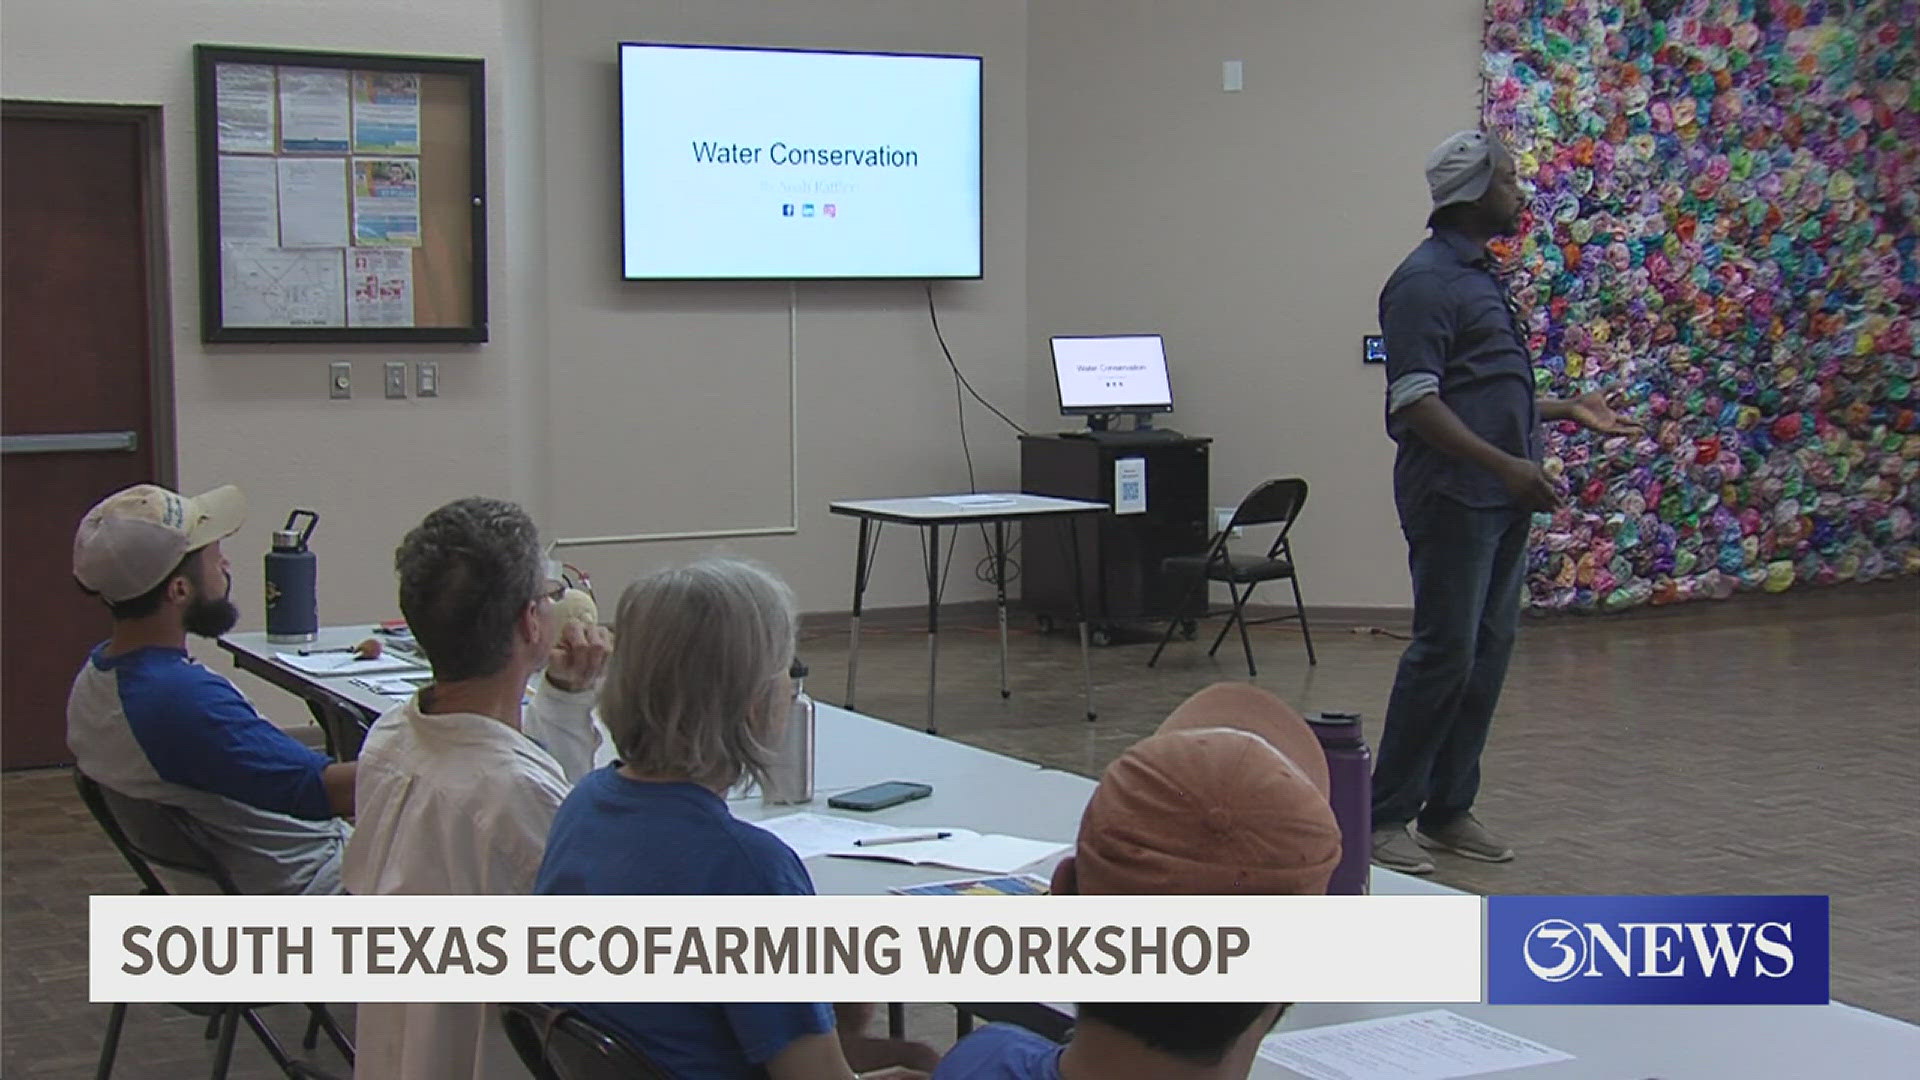 The free workshop was held to teach people how to efficiently conserve water.